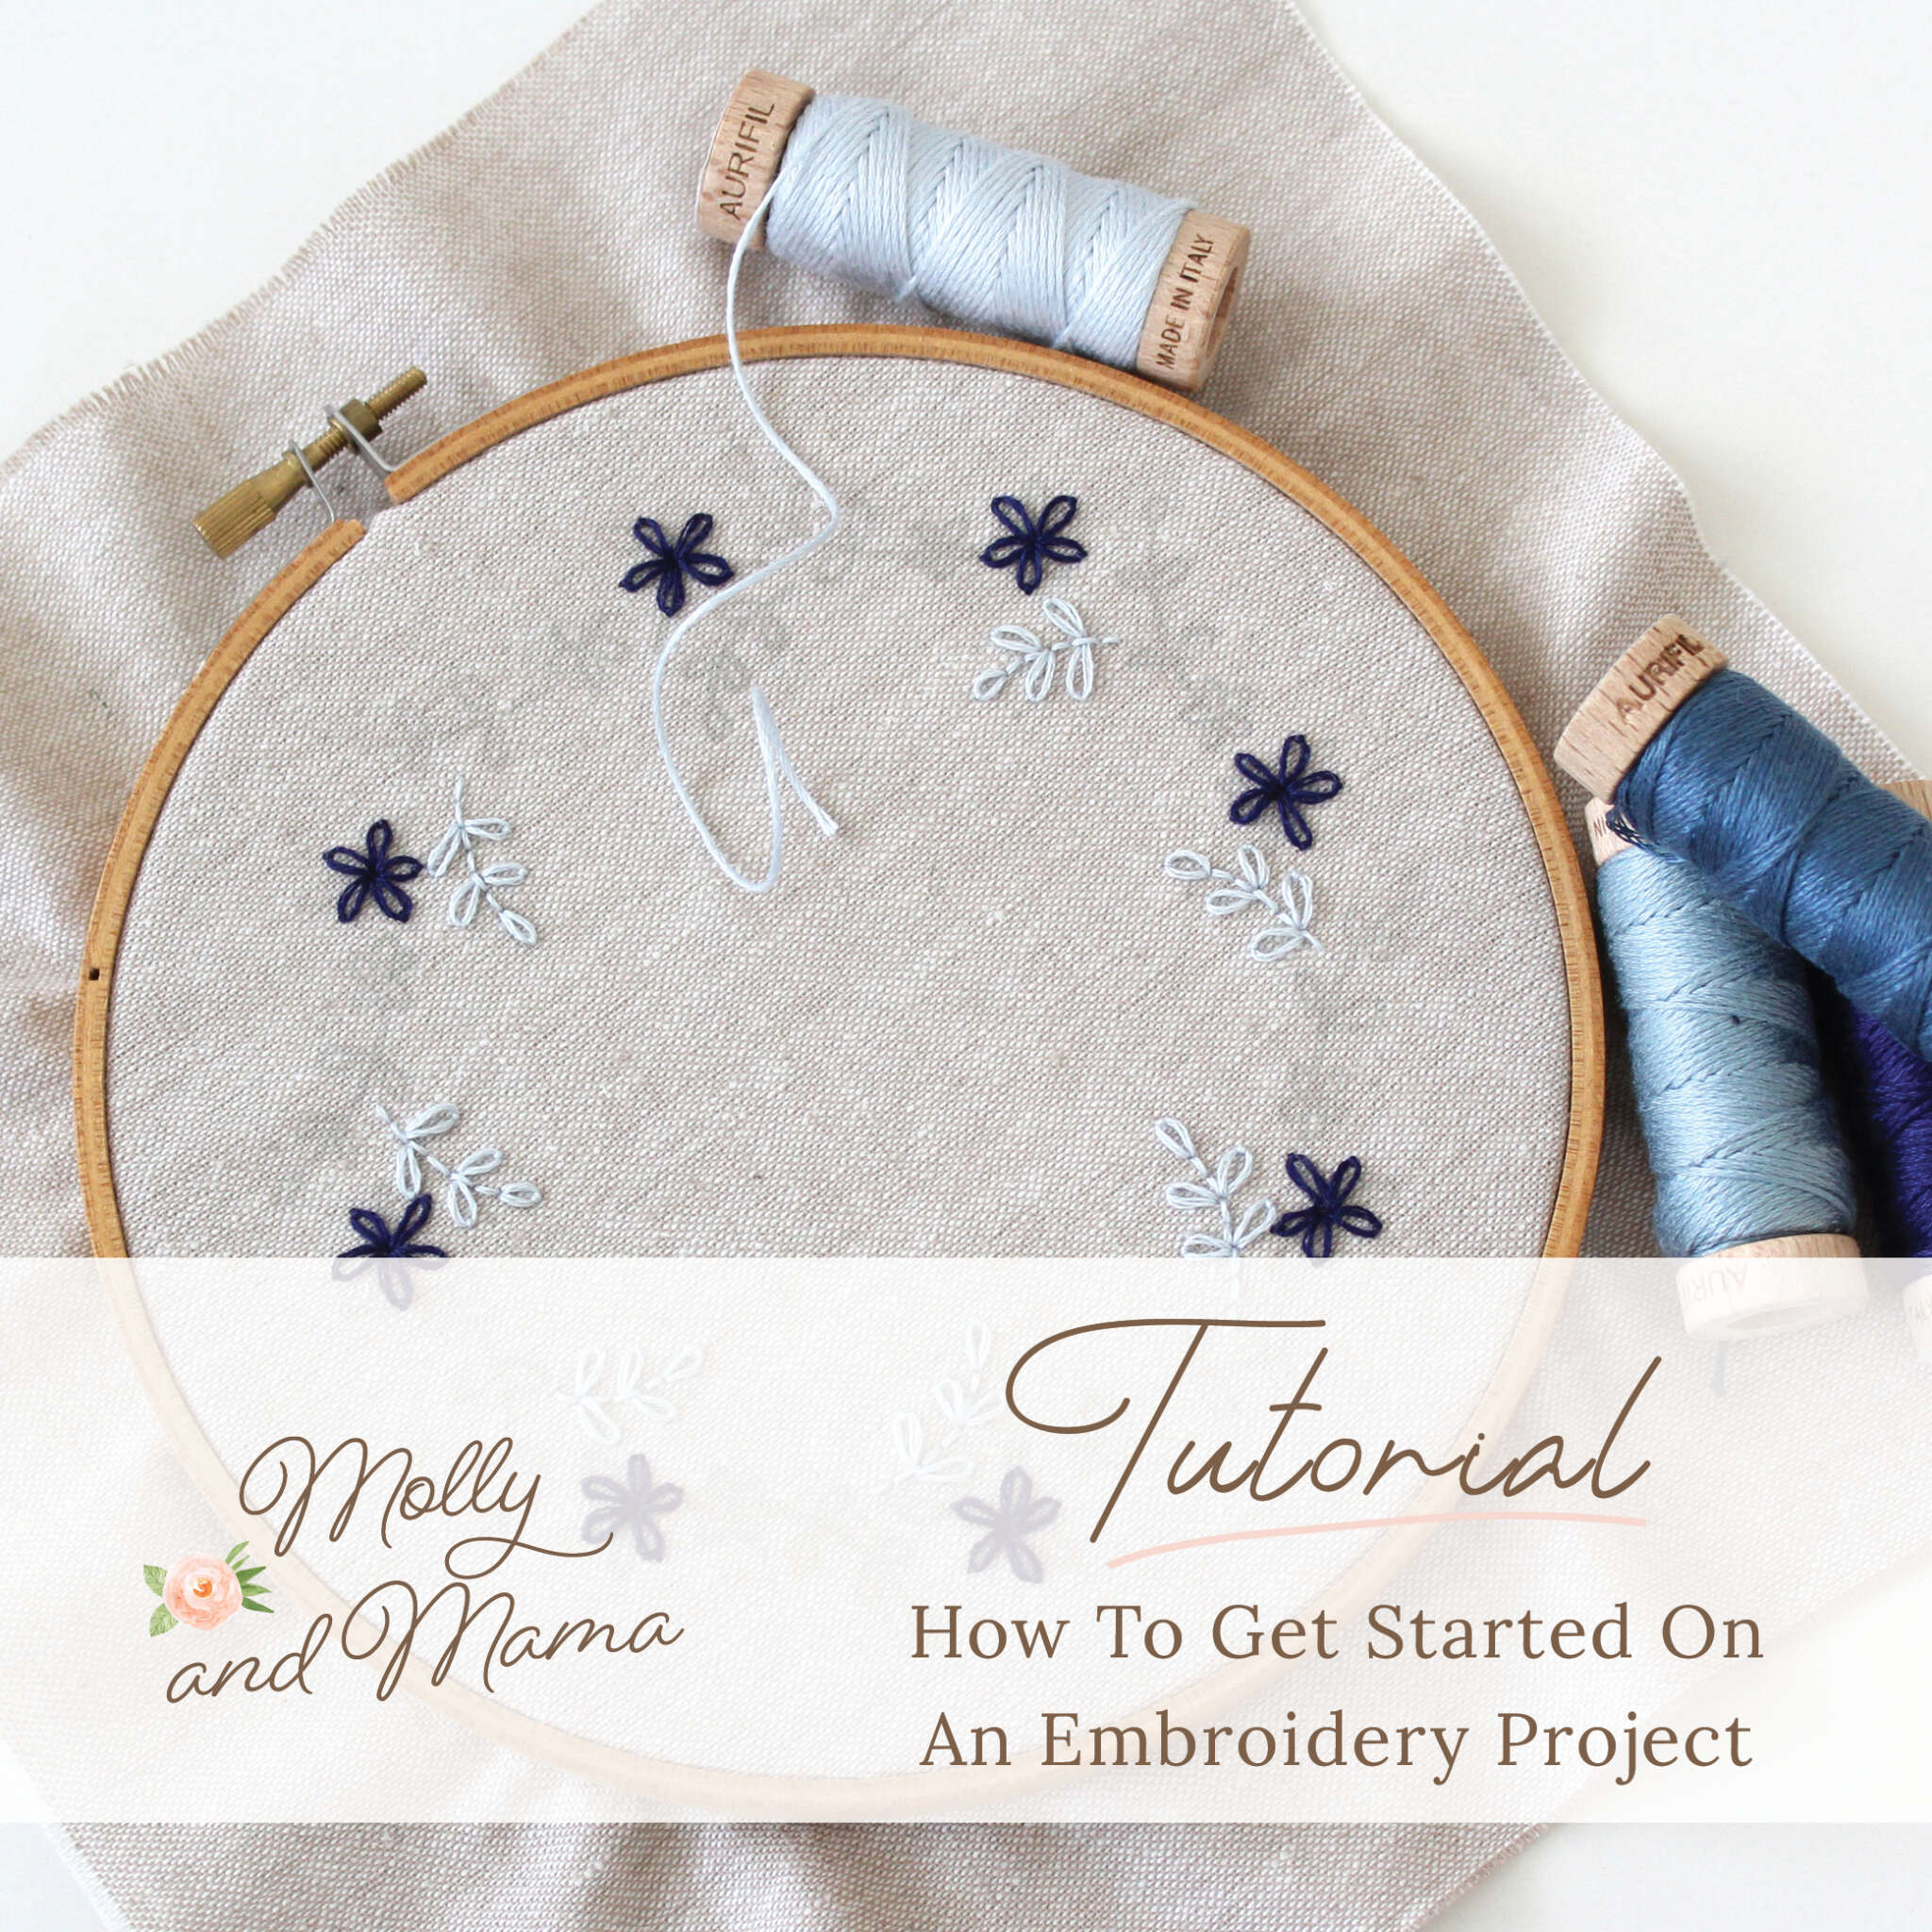 Tips for Working with Embroidery Floss